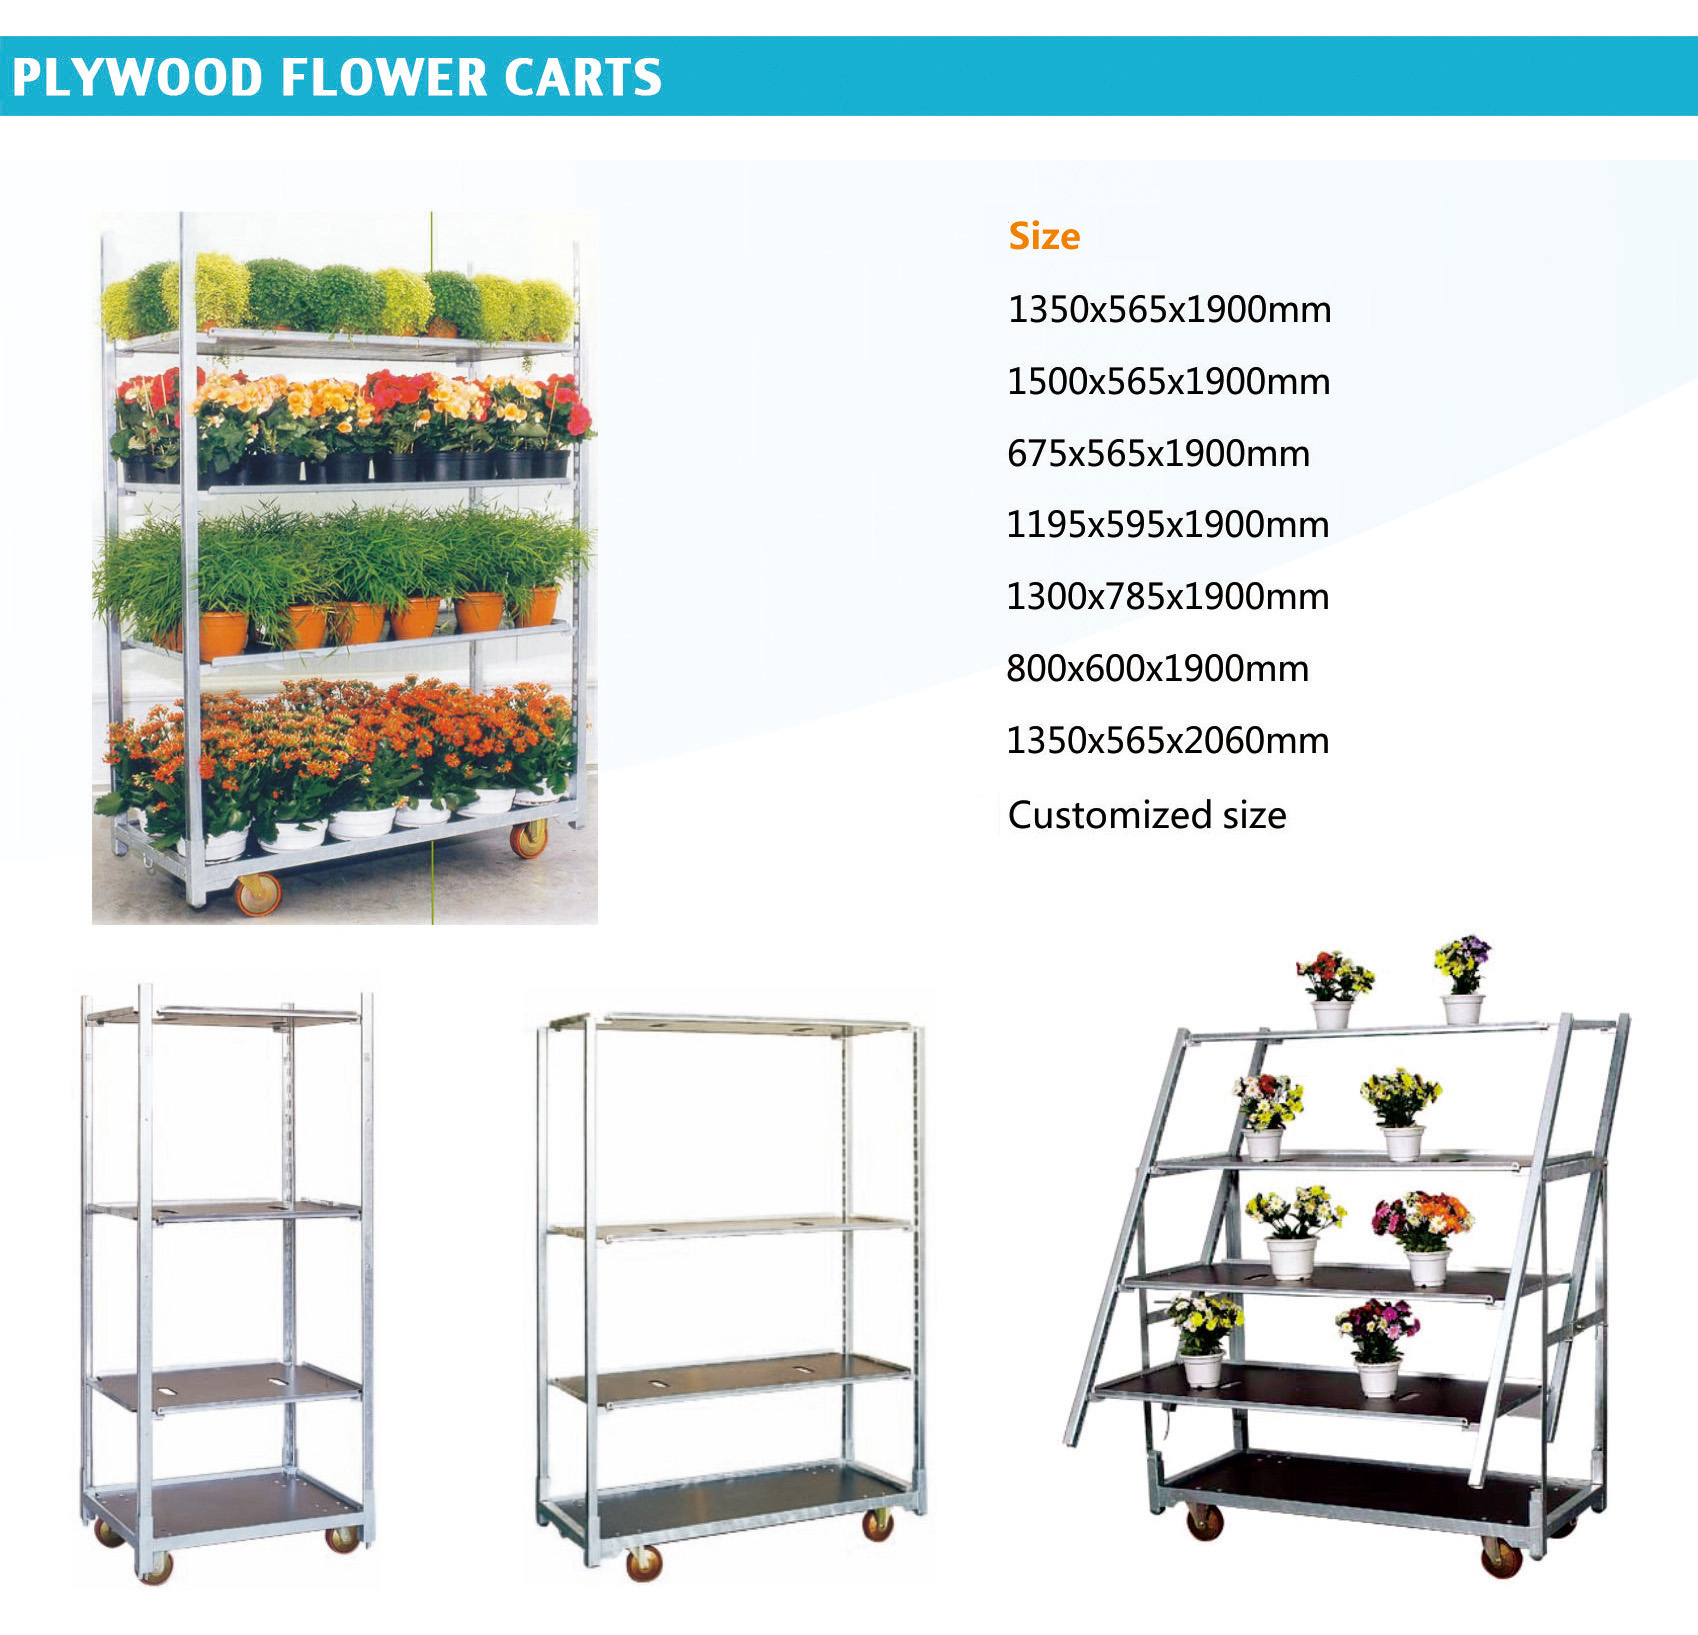 Plywood Flower Carts